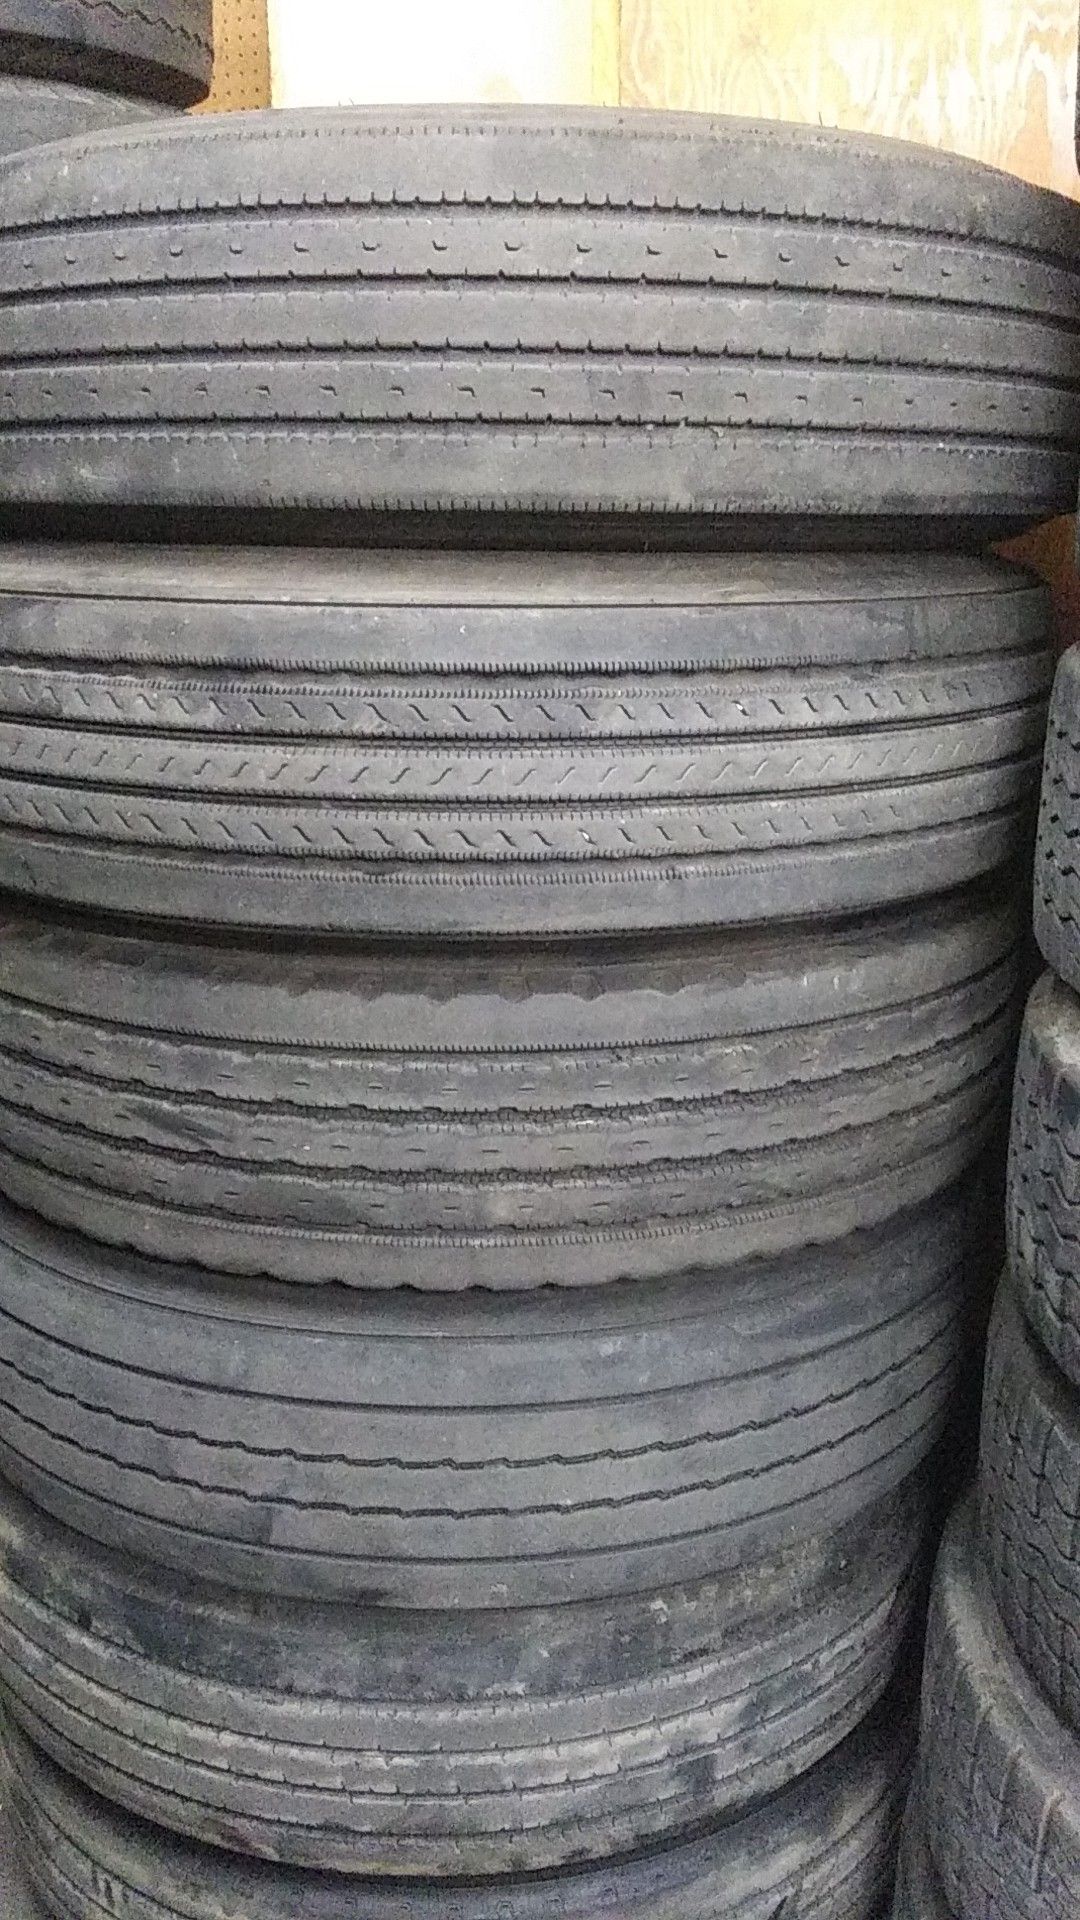 Used tires 295/75/22.5